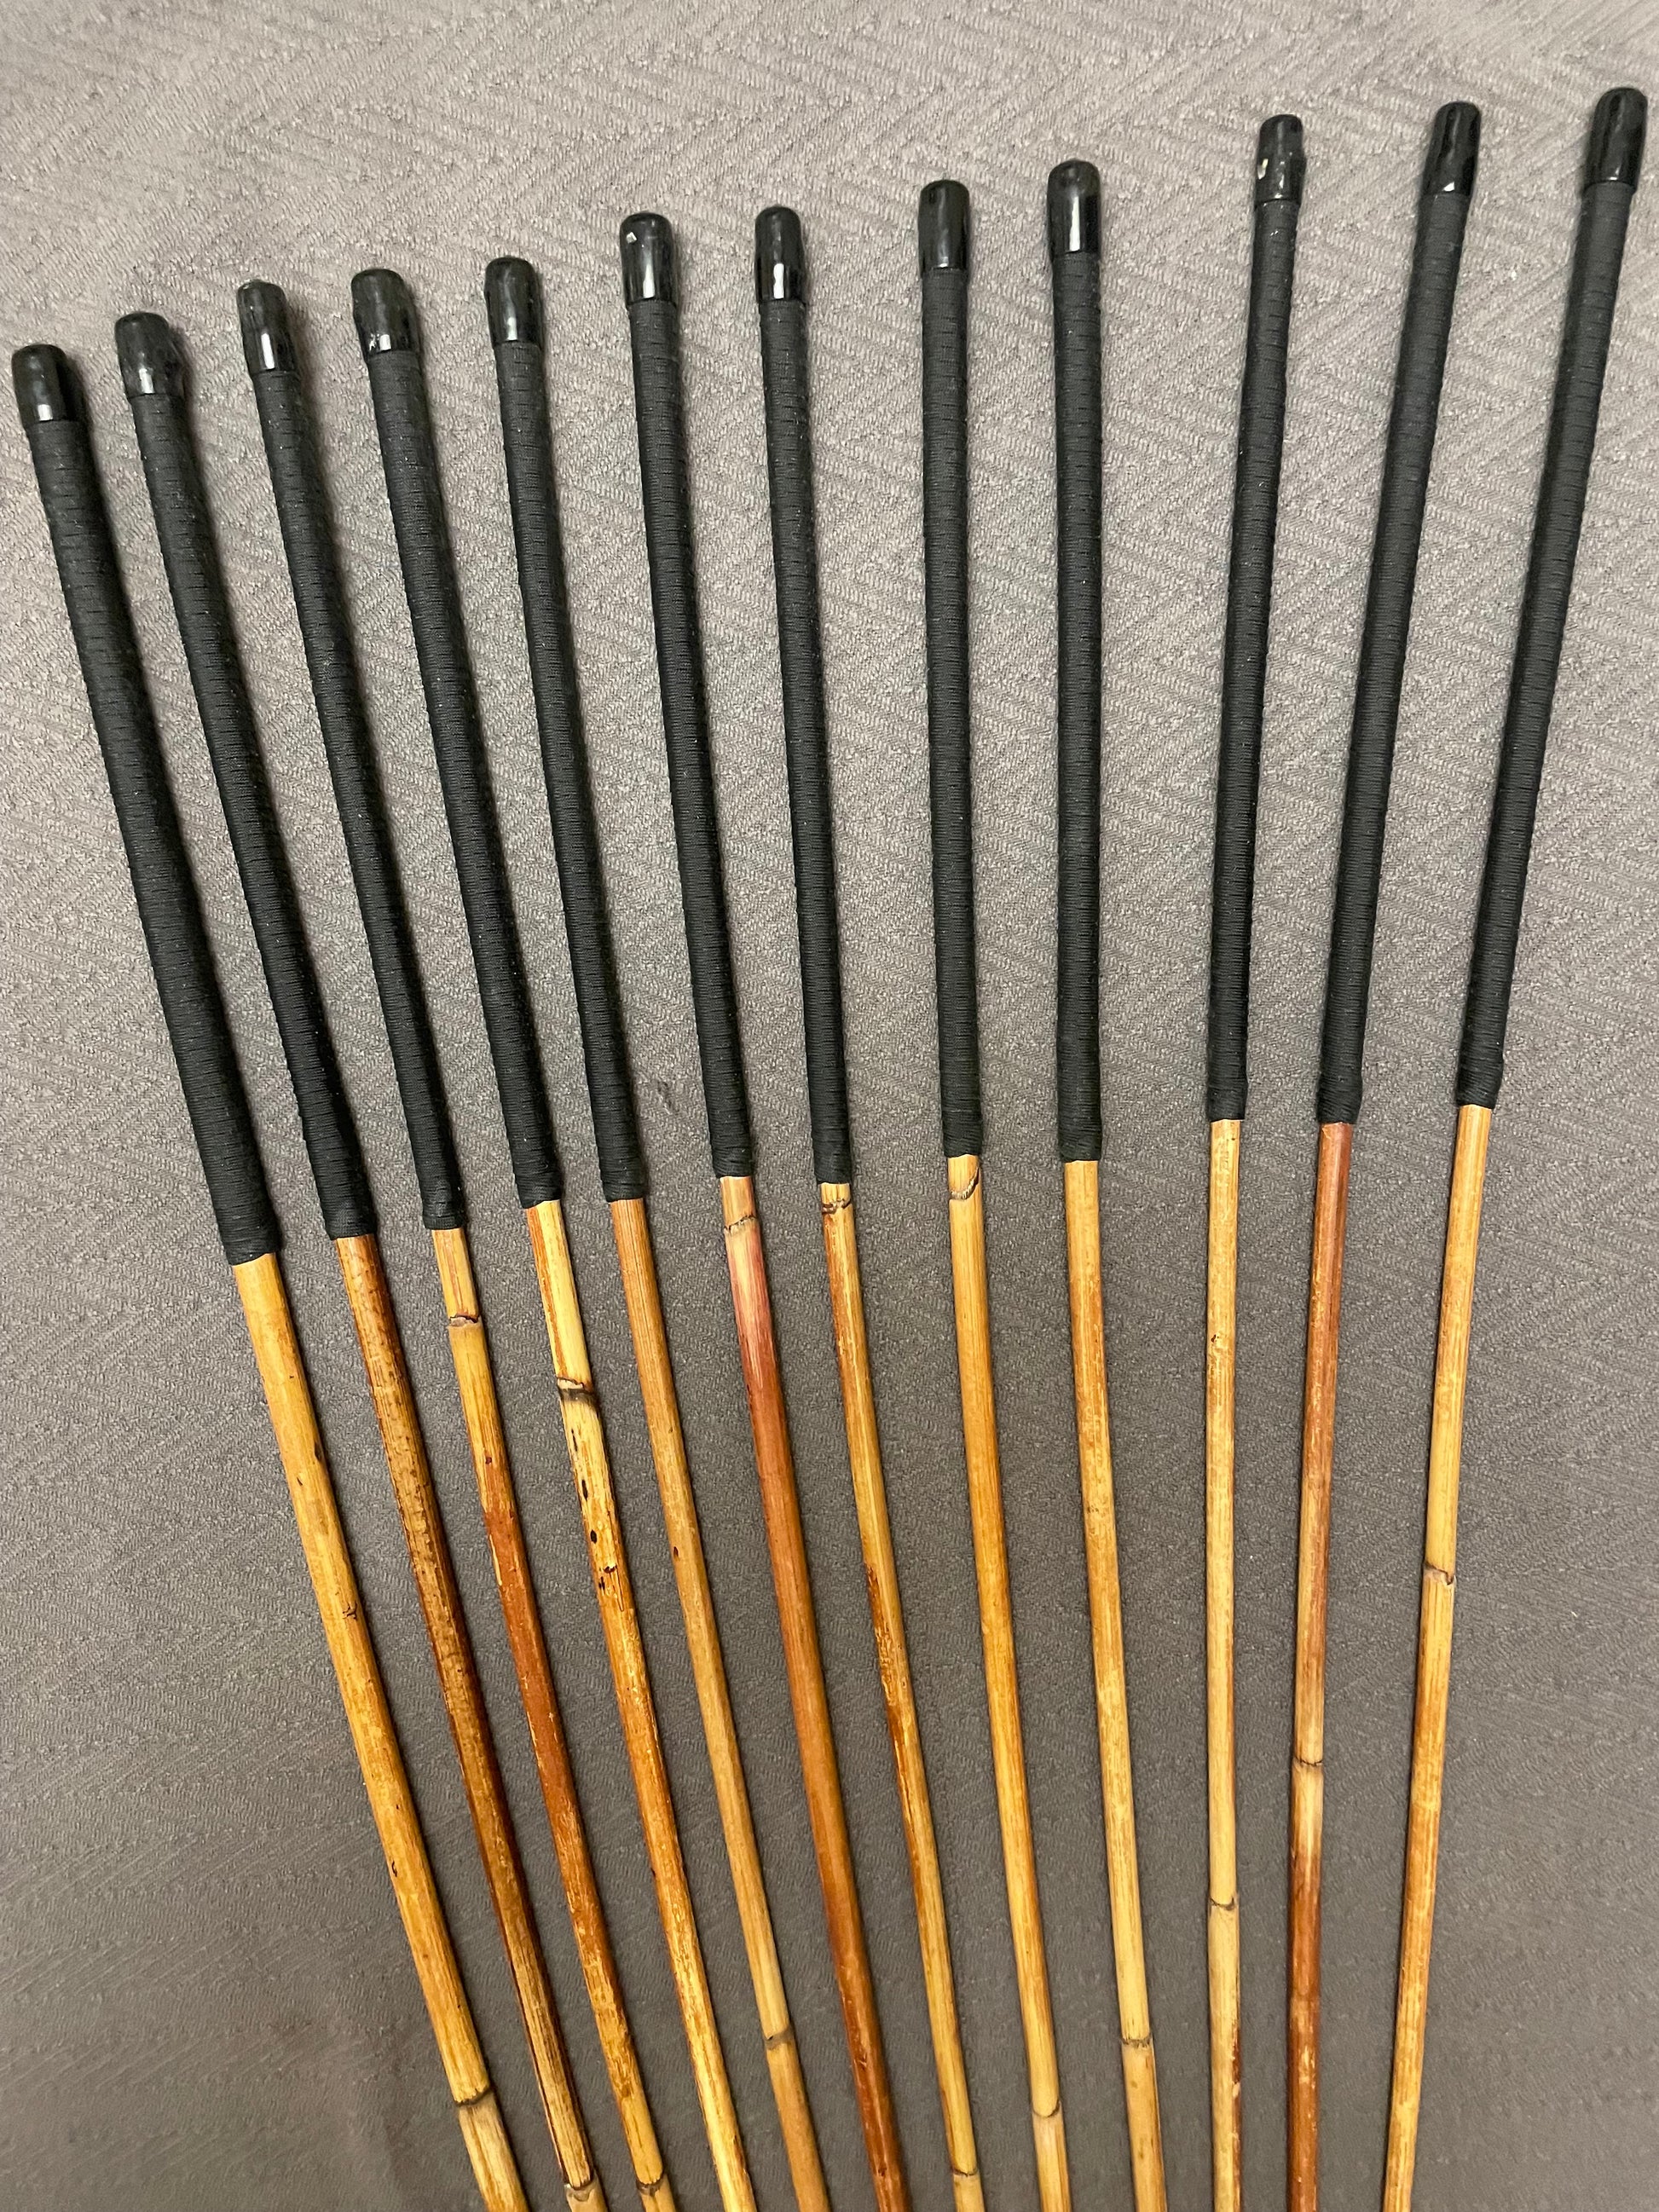 Set of 12 Classic Dragon Rattan Punishment Canes with Black Paracord Handles - 95 to 100 cms Length - Sales Special